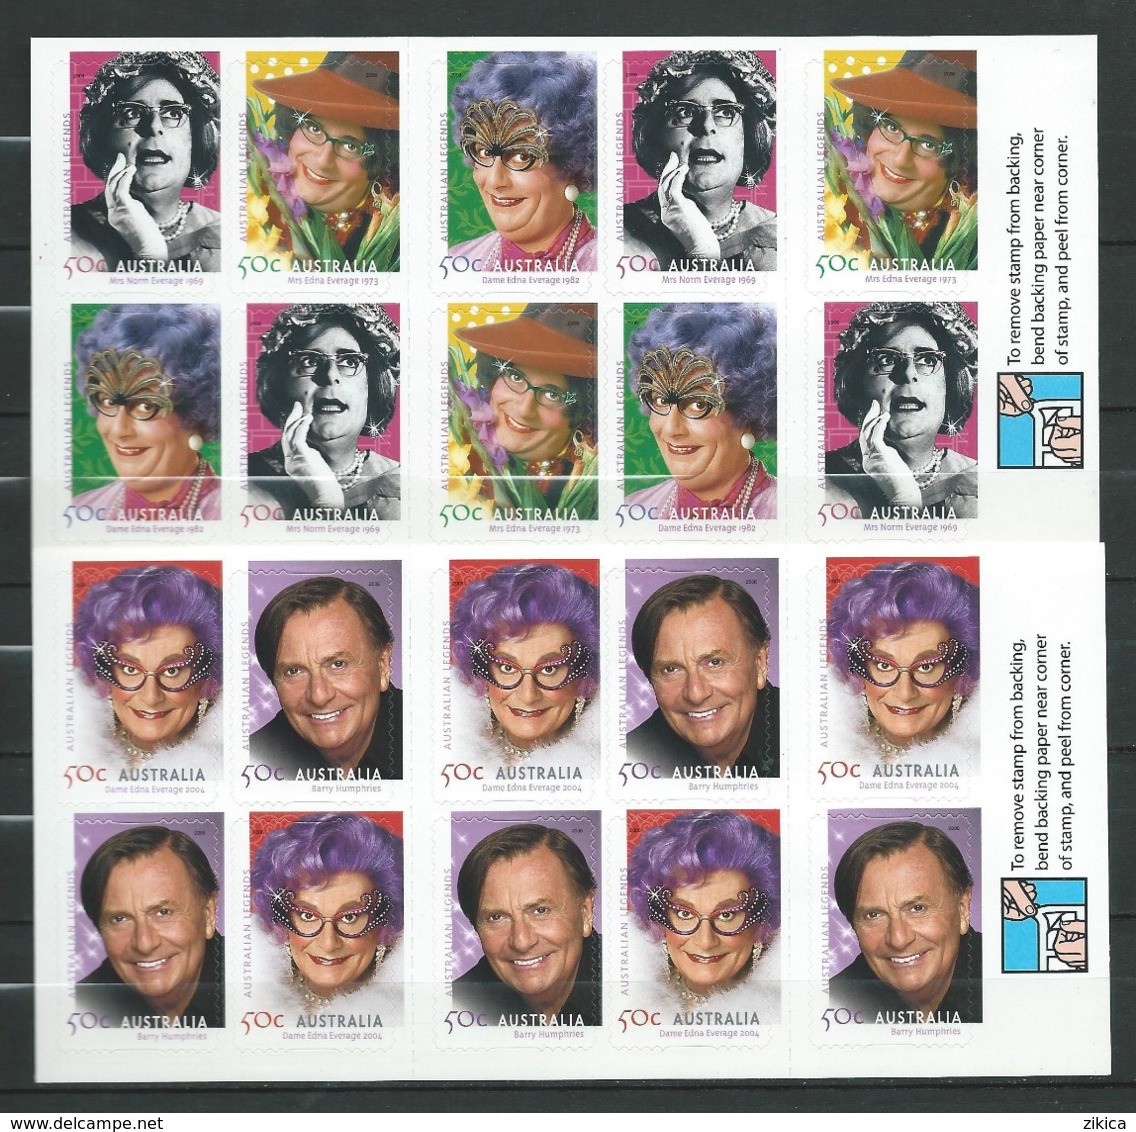 Australia 2006 Australian Legends.Barry Humphries - Comedian, Actor.2 Booklet I & II.( Self Adhesive Stamp ).MINT.MNH - Mint Stamps